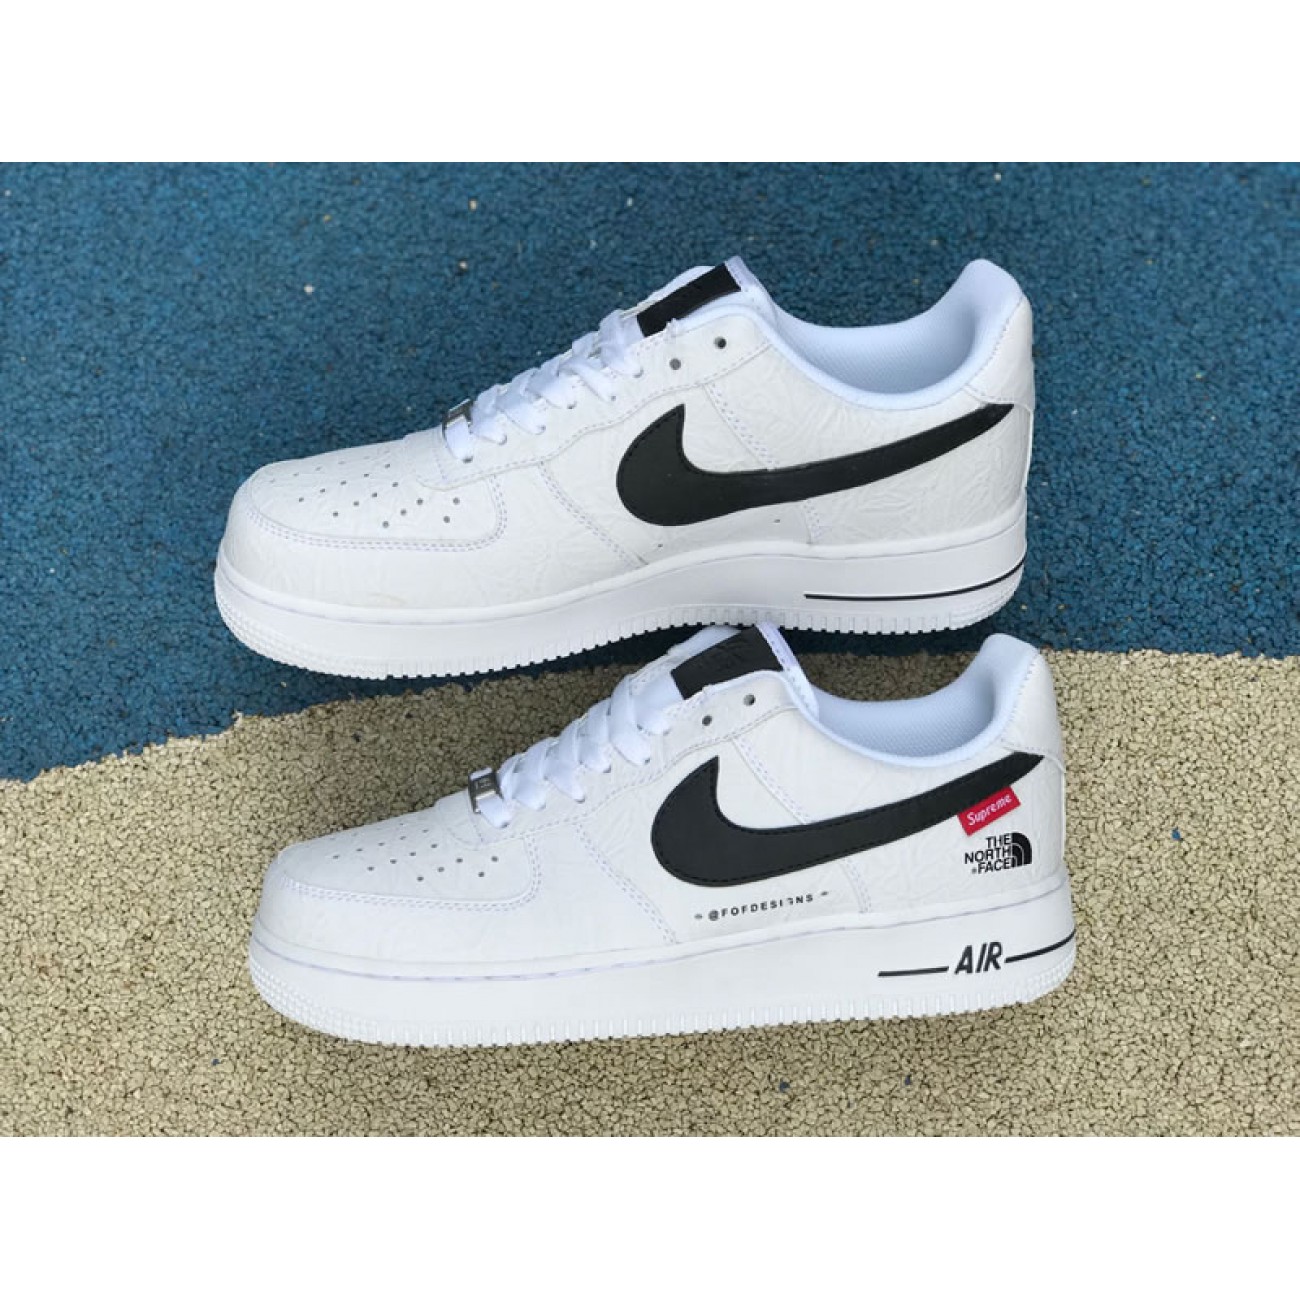 Supreme® x The North Face x Nike Air Force 1 Sup AF1 Low White/Black AR3066-100